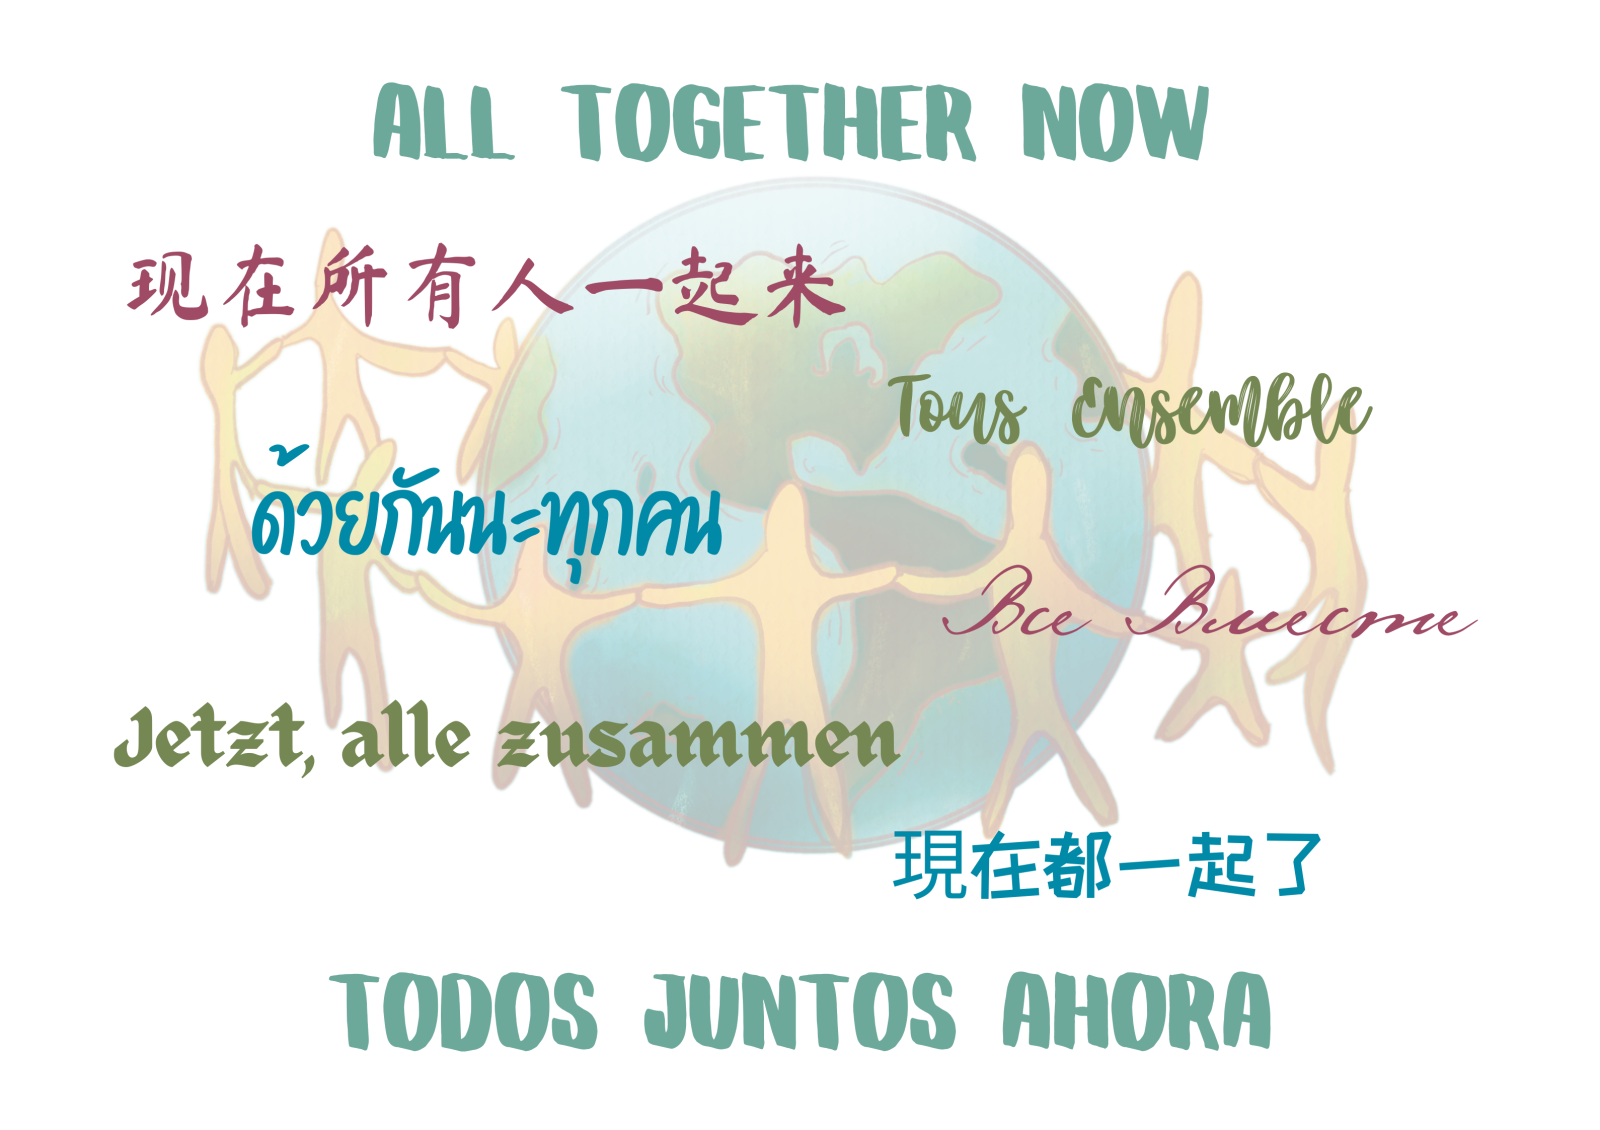 An image of the earth with the words "all together now" surrounding it in different languages